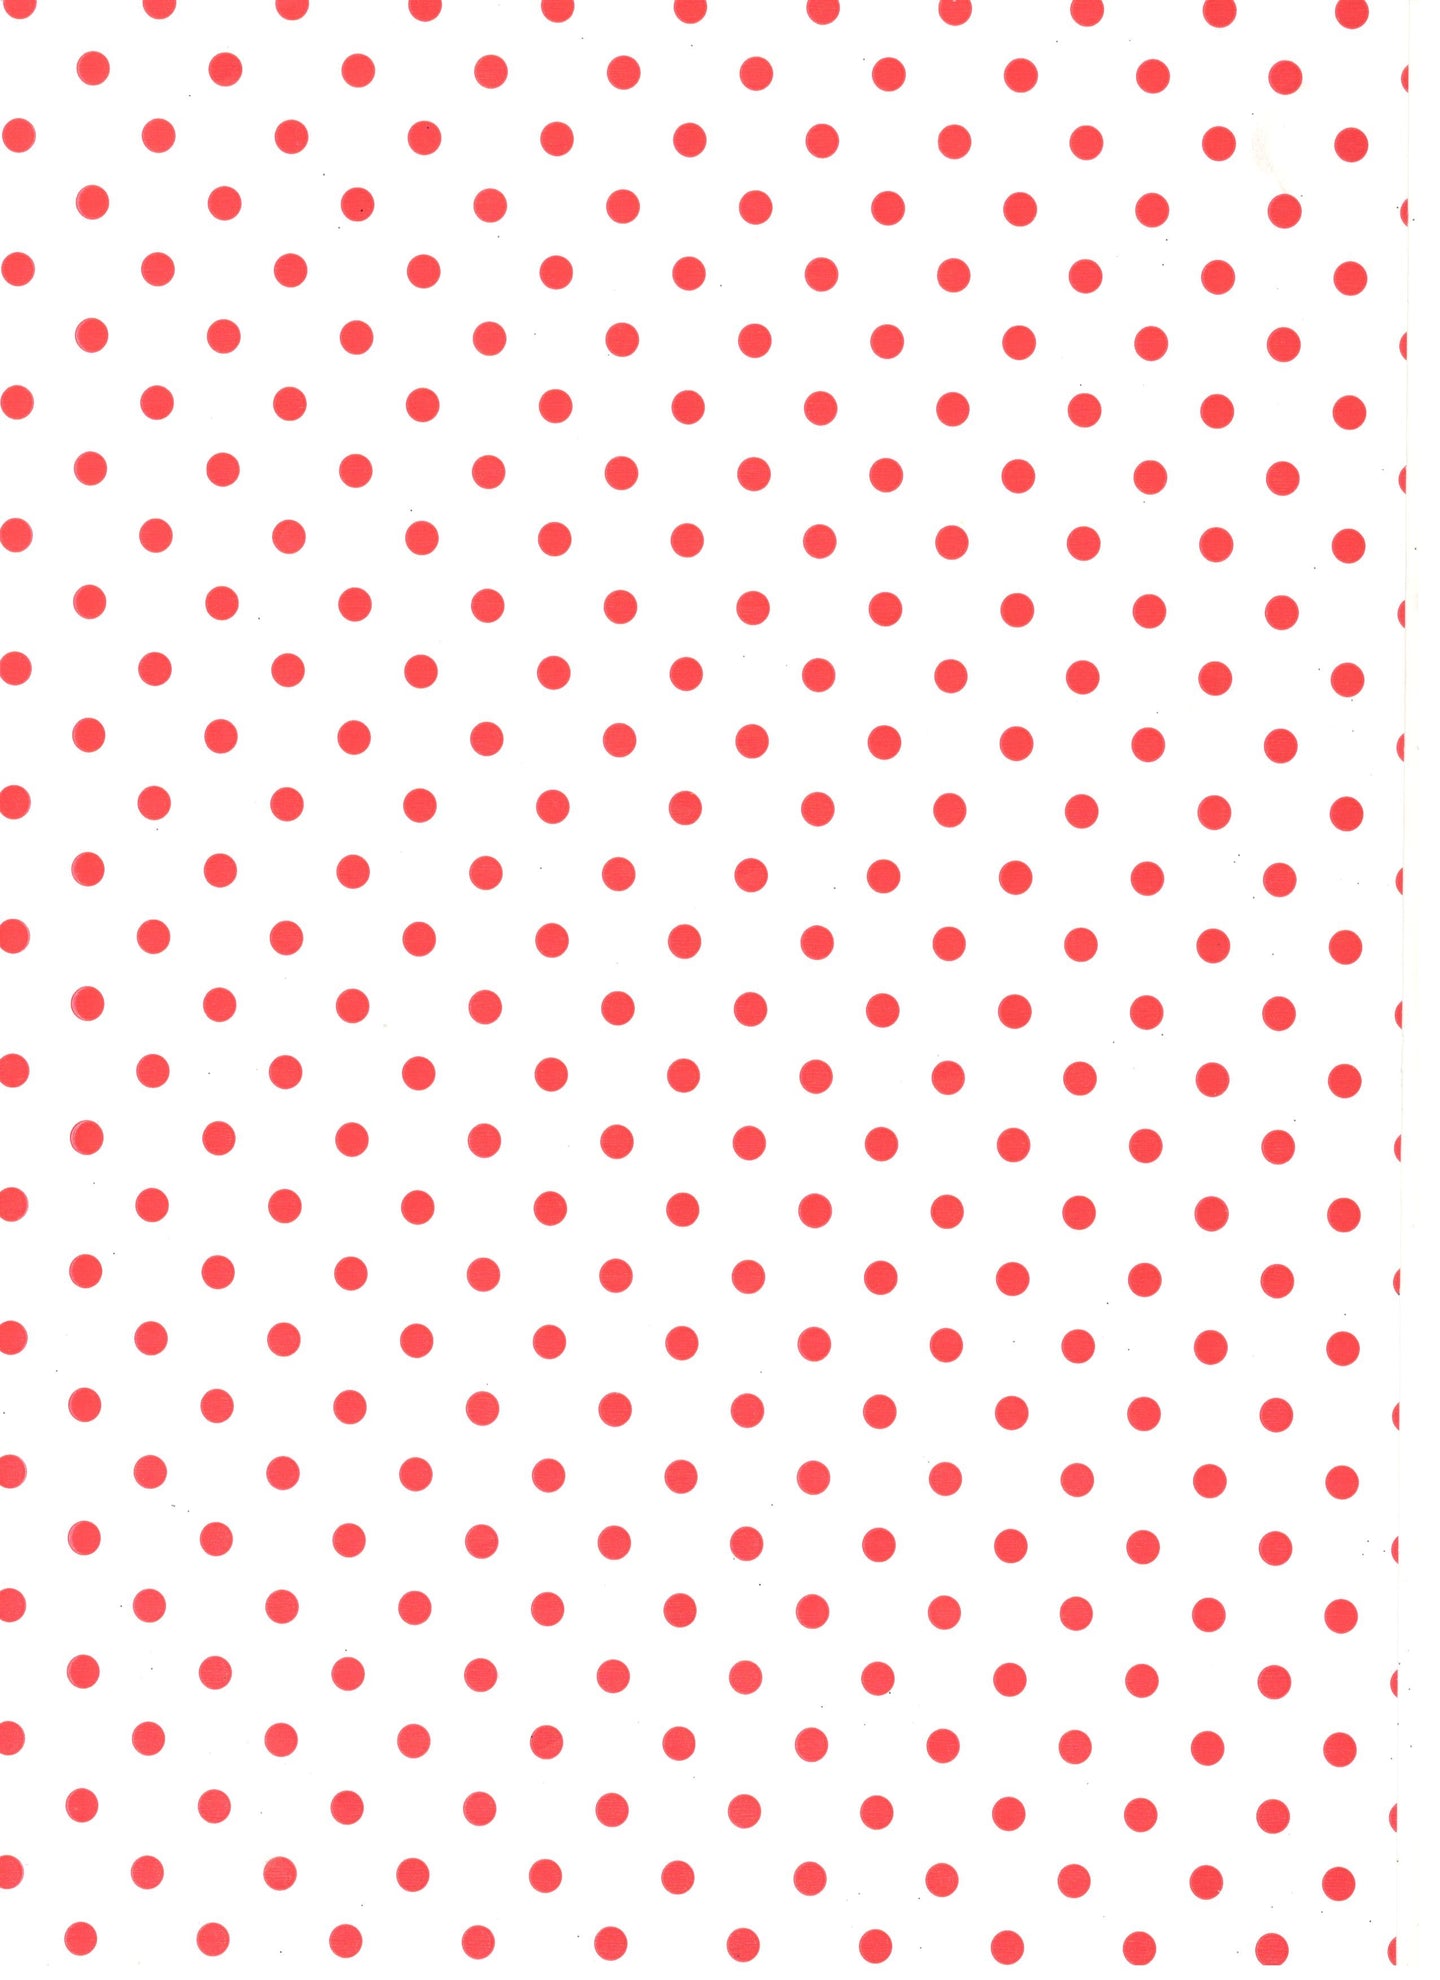 Small Spots Red On White Paper